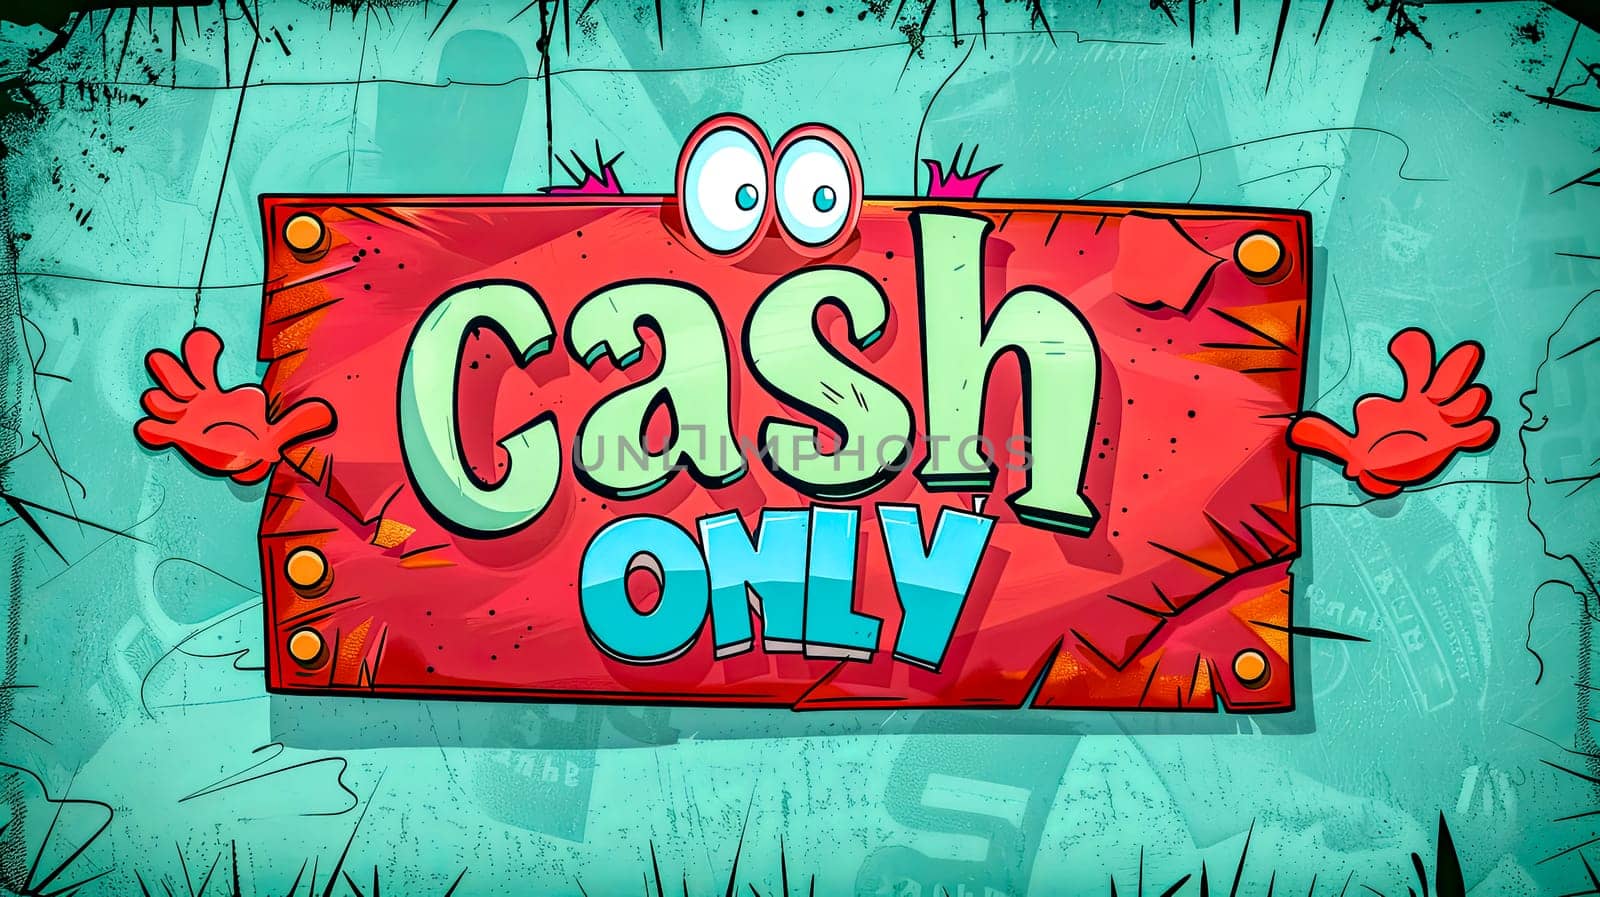 A vibrant 'cash only' sign with playful cartoon features on a textured background